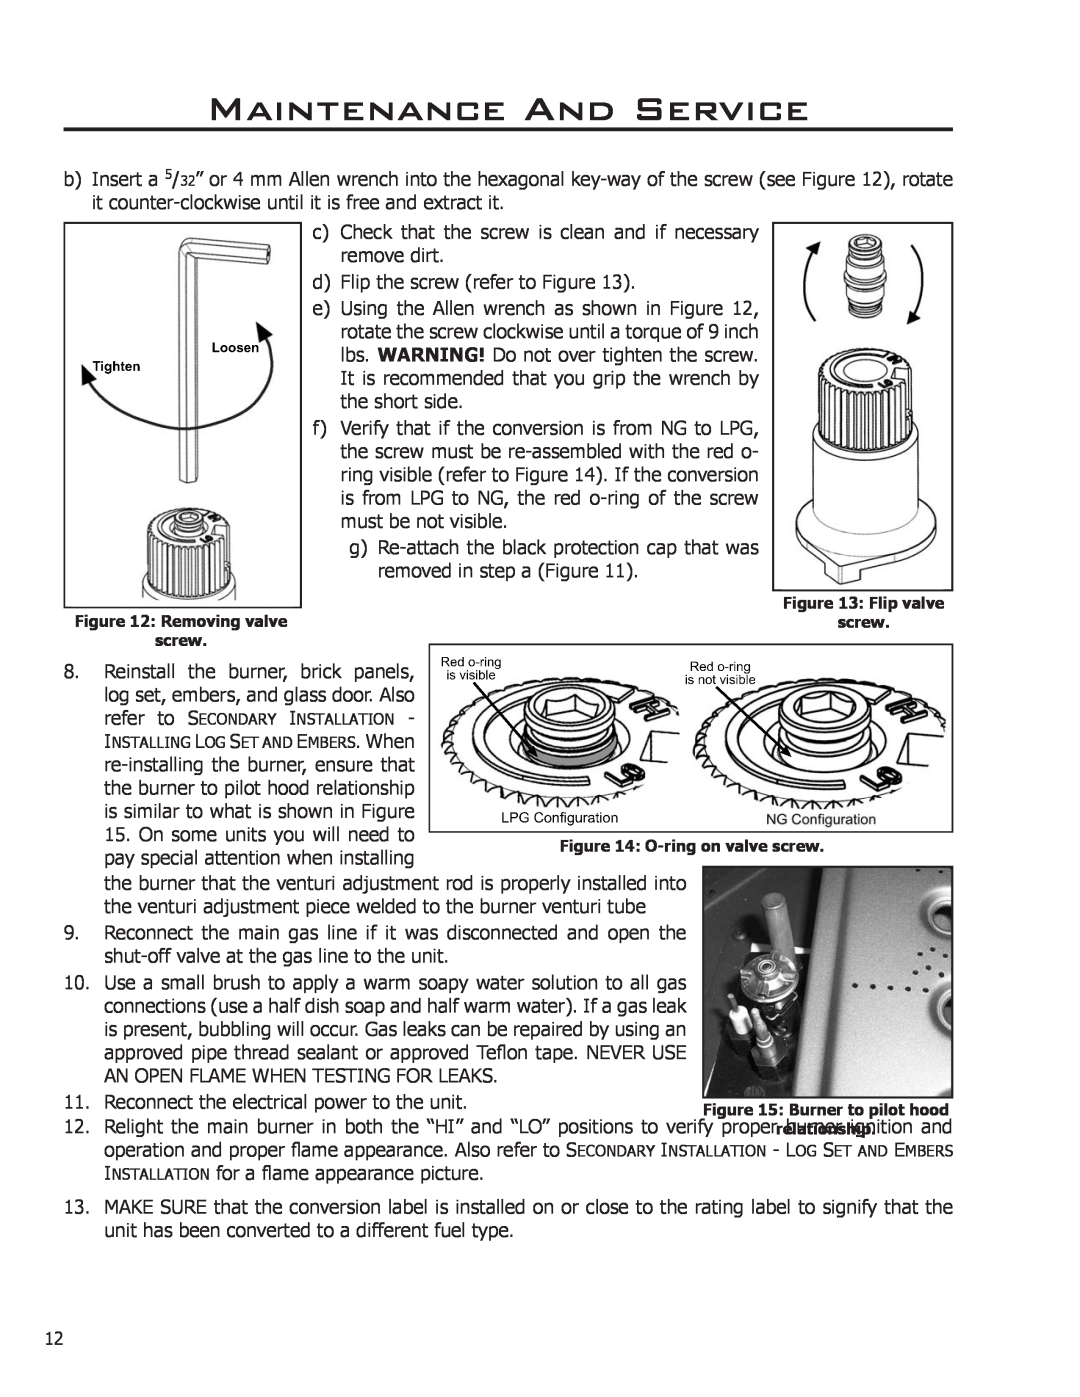 Enviro Indoor Gas Fireplace owner manual Reconnect the electrical power to the unit, Maintenance And Service 